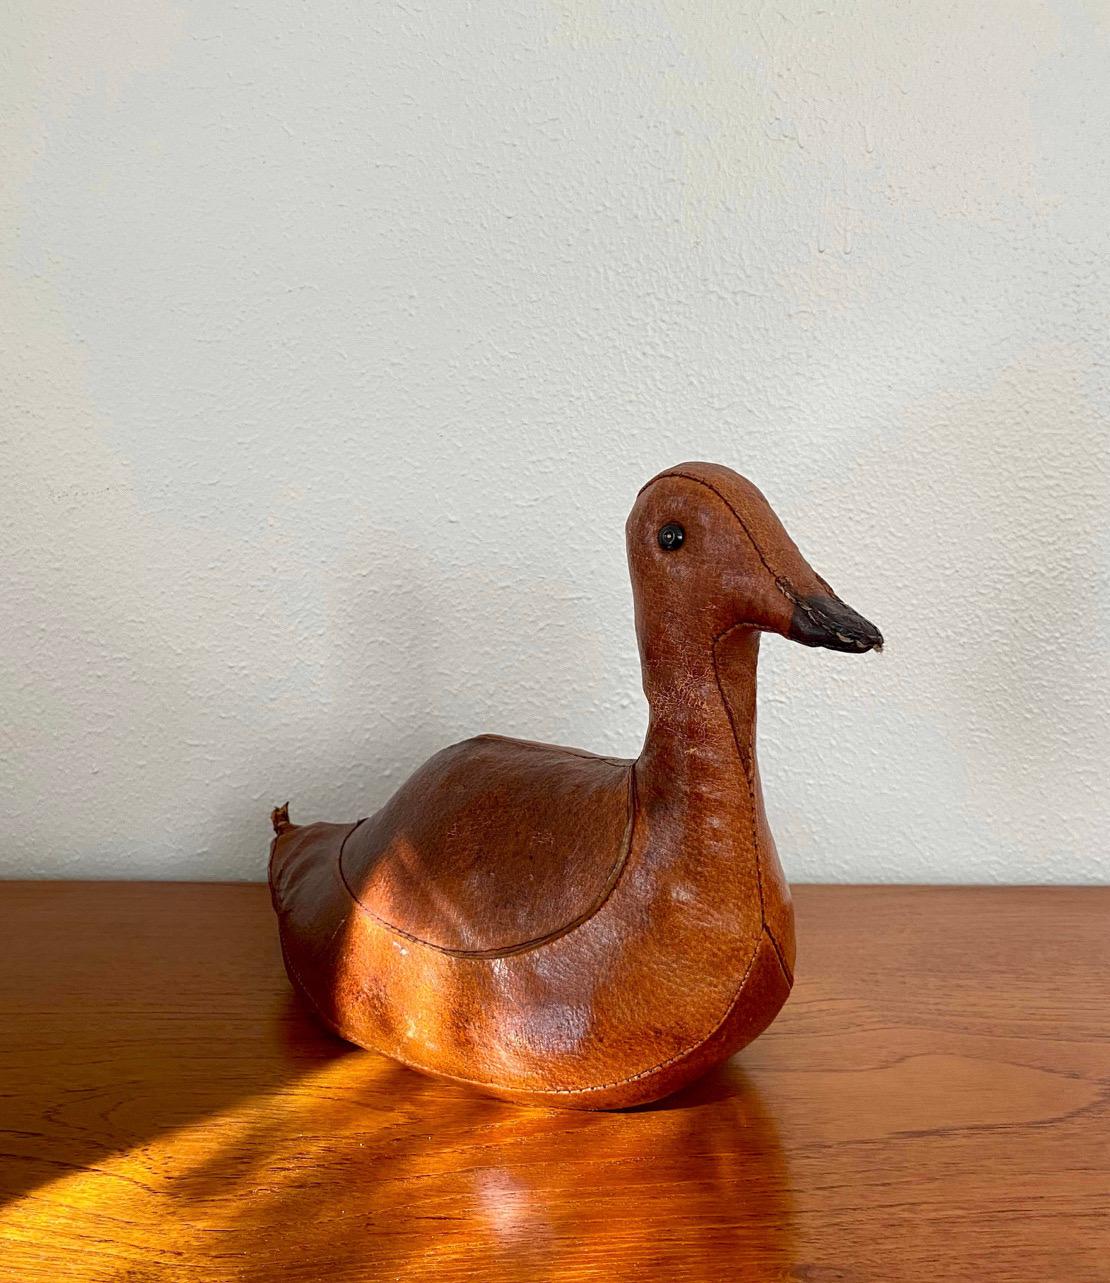 Vintage Abercrombie & Fitch duck. A folk crafted, hand stitched leather accent piece. Grain sack weighted with black beak. Some wear and patina to leather.